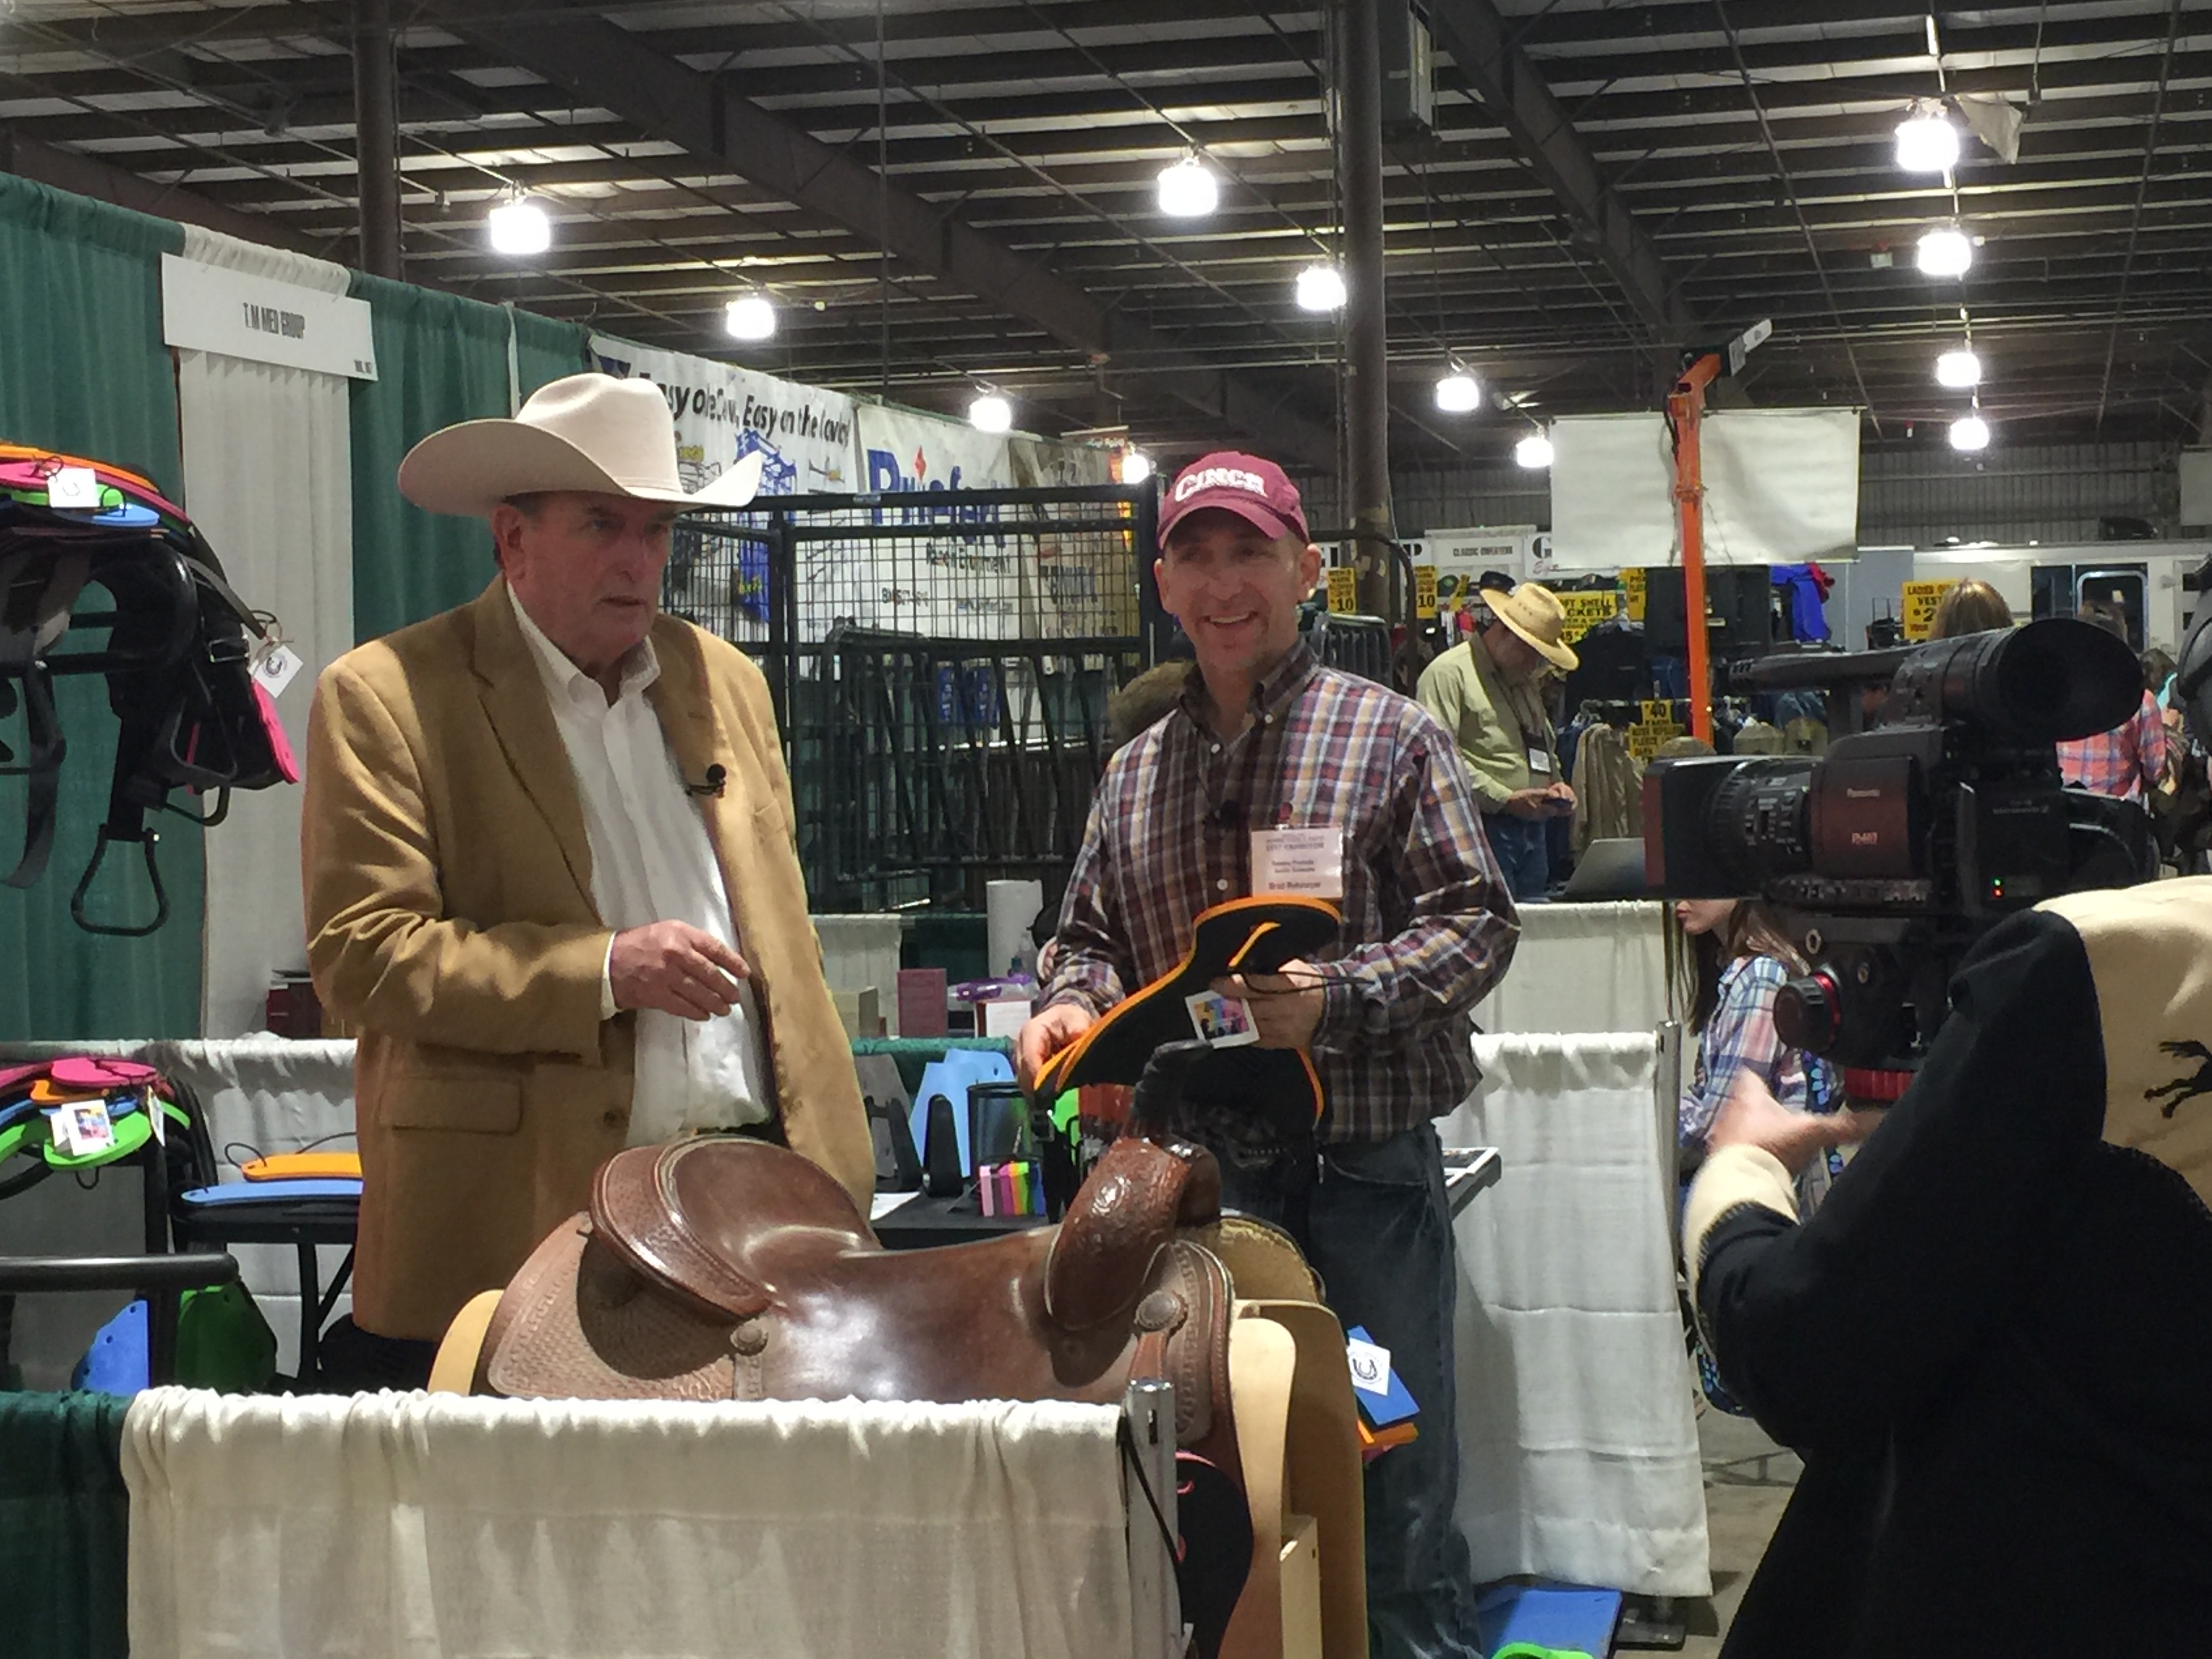 World Horse Expo - Timonium - Visit by Tom Seay " Best of America by Horseback "